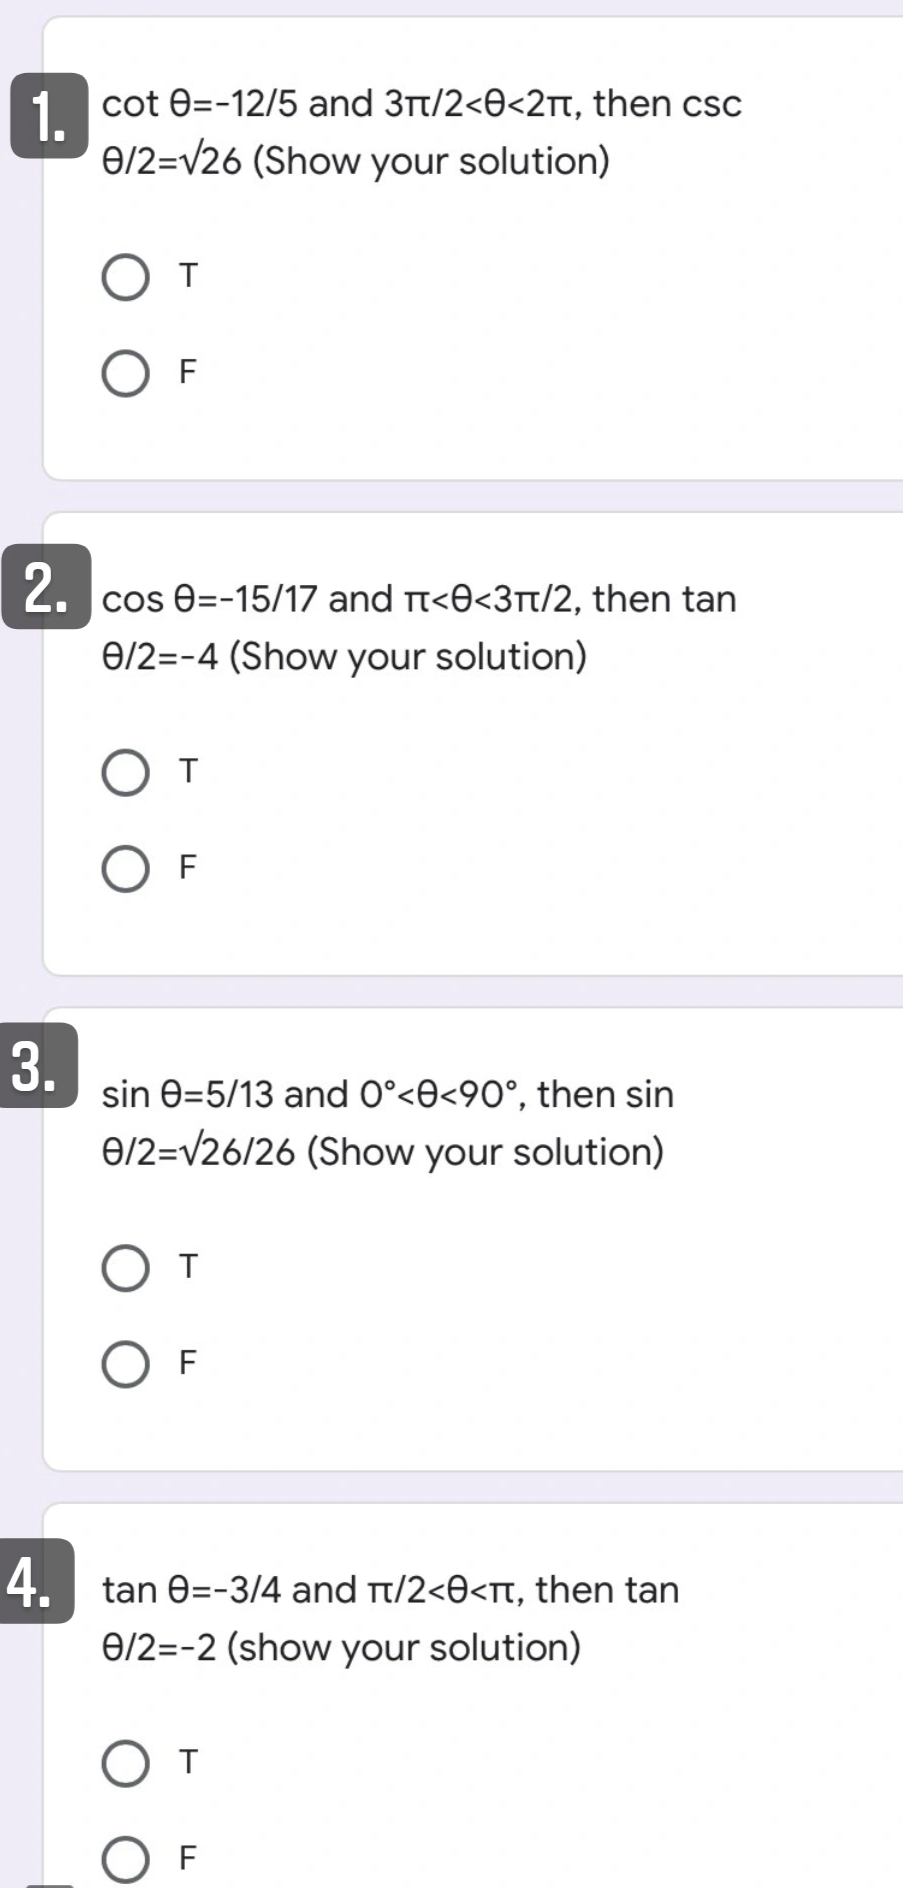 1 cot 0=-12/5 and 3t/2<0<2Tt, then csc
6/2=V26 (Show your solution)
F
cos e=-15/17 and t<O<3t/2, then tan
0/2=-4 (Show your solution)
F
3.
sin e=5/13 and 0°<0<90°, then sin
6/2=/26/26 (Show your solution)
T
F
4. tan 0=-3/4 and Tt/2<0<Tt, then tan
0/2=-2 (show your solution)
O F
